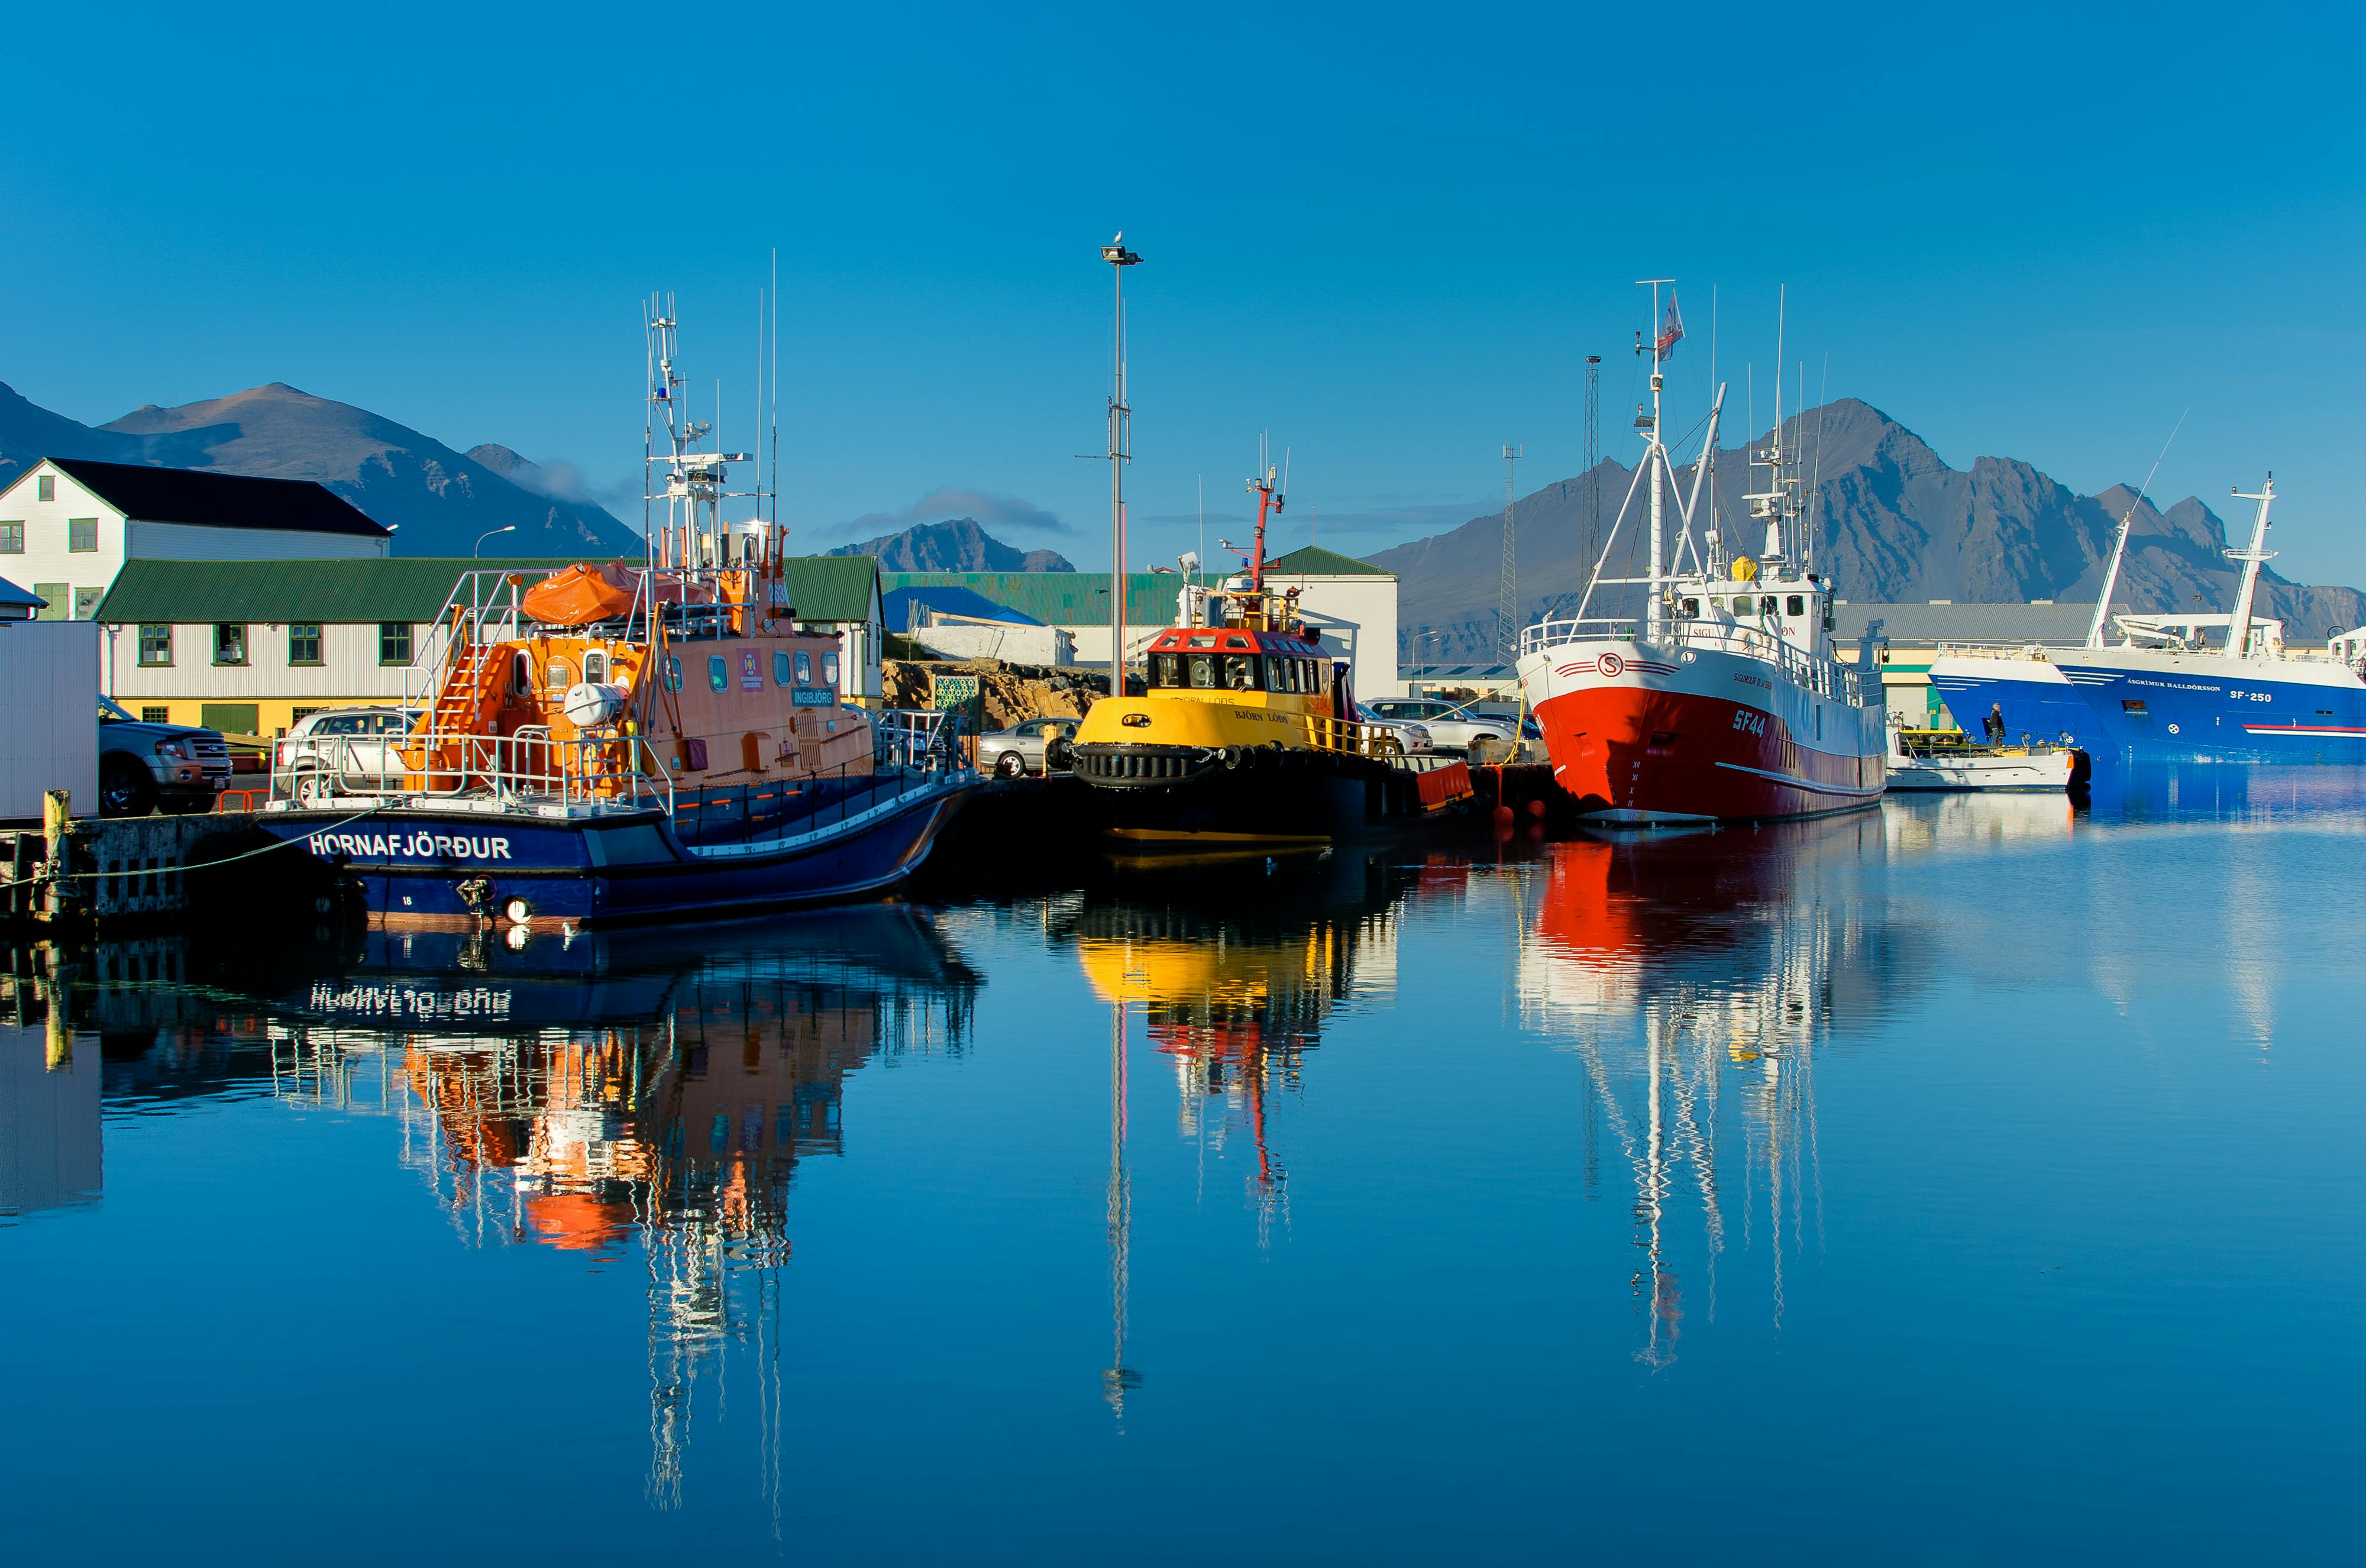 Colorful boats in a harbor reflecting in the calm sea